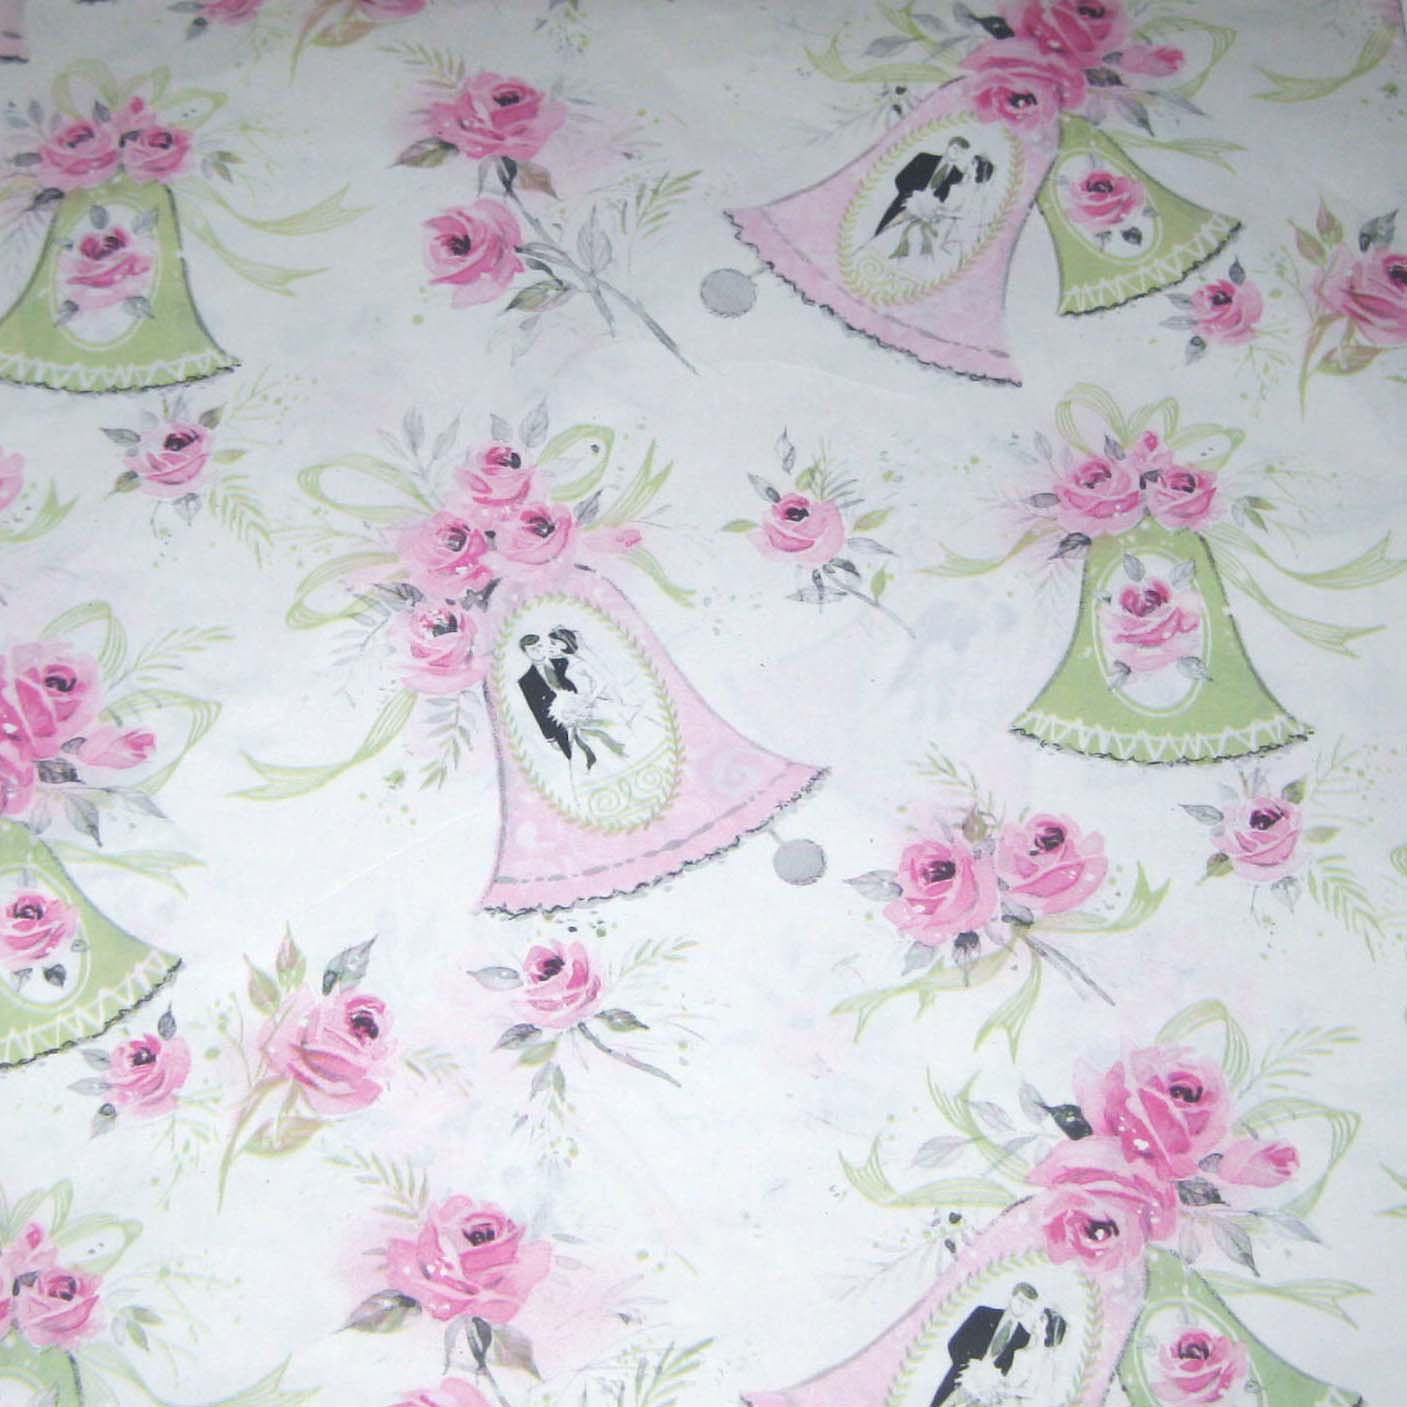 Wedding Gift Wrapping Paper
 Vintage Wedding Wrapping Paper or Gift Wrap with Bride and